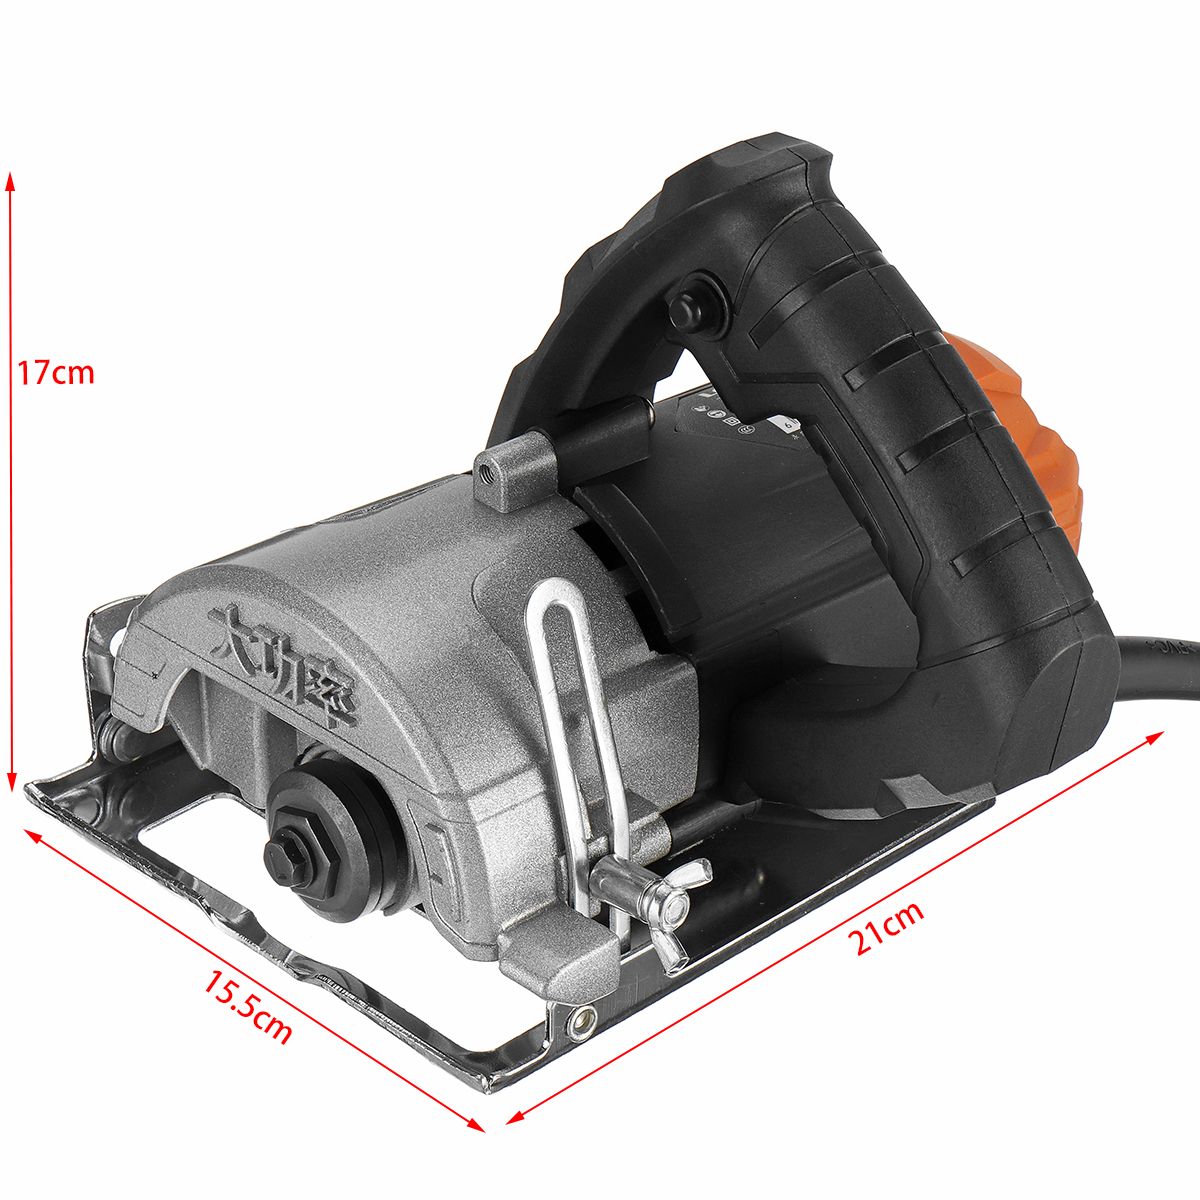 1180W-Professional-Electric-Saws-Cutter-Machine-Wrench-Electric-Saw-Tools-with-Pieces-Blades-1527636